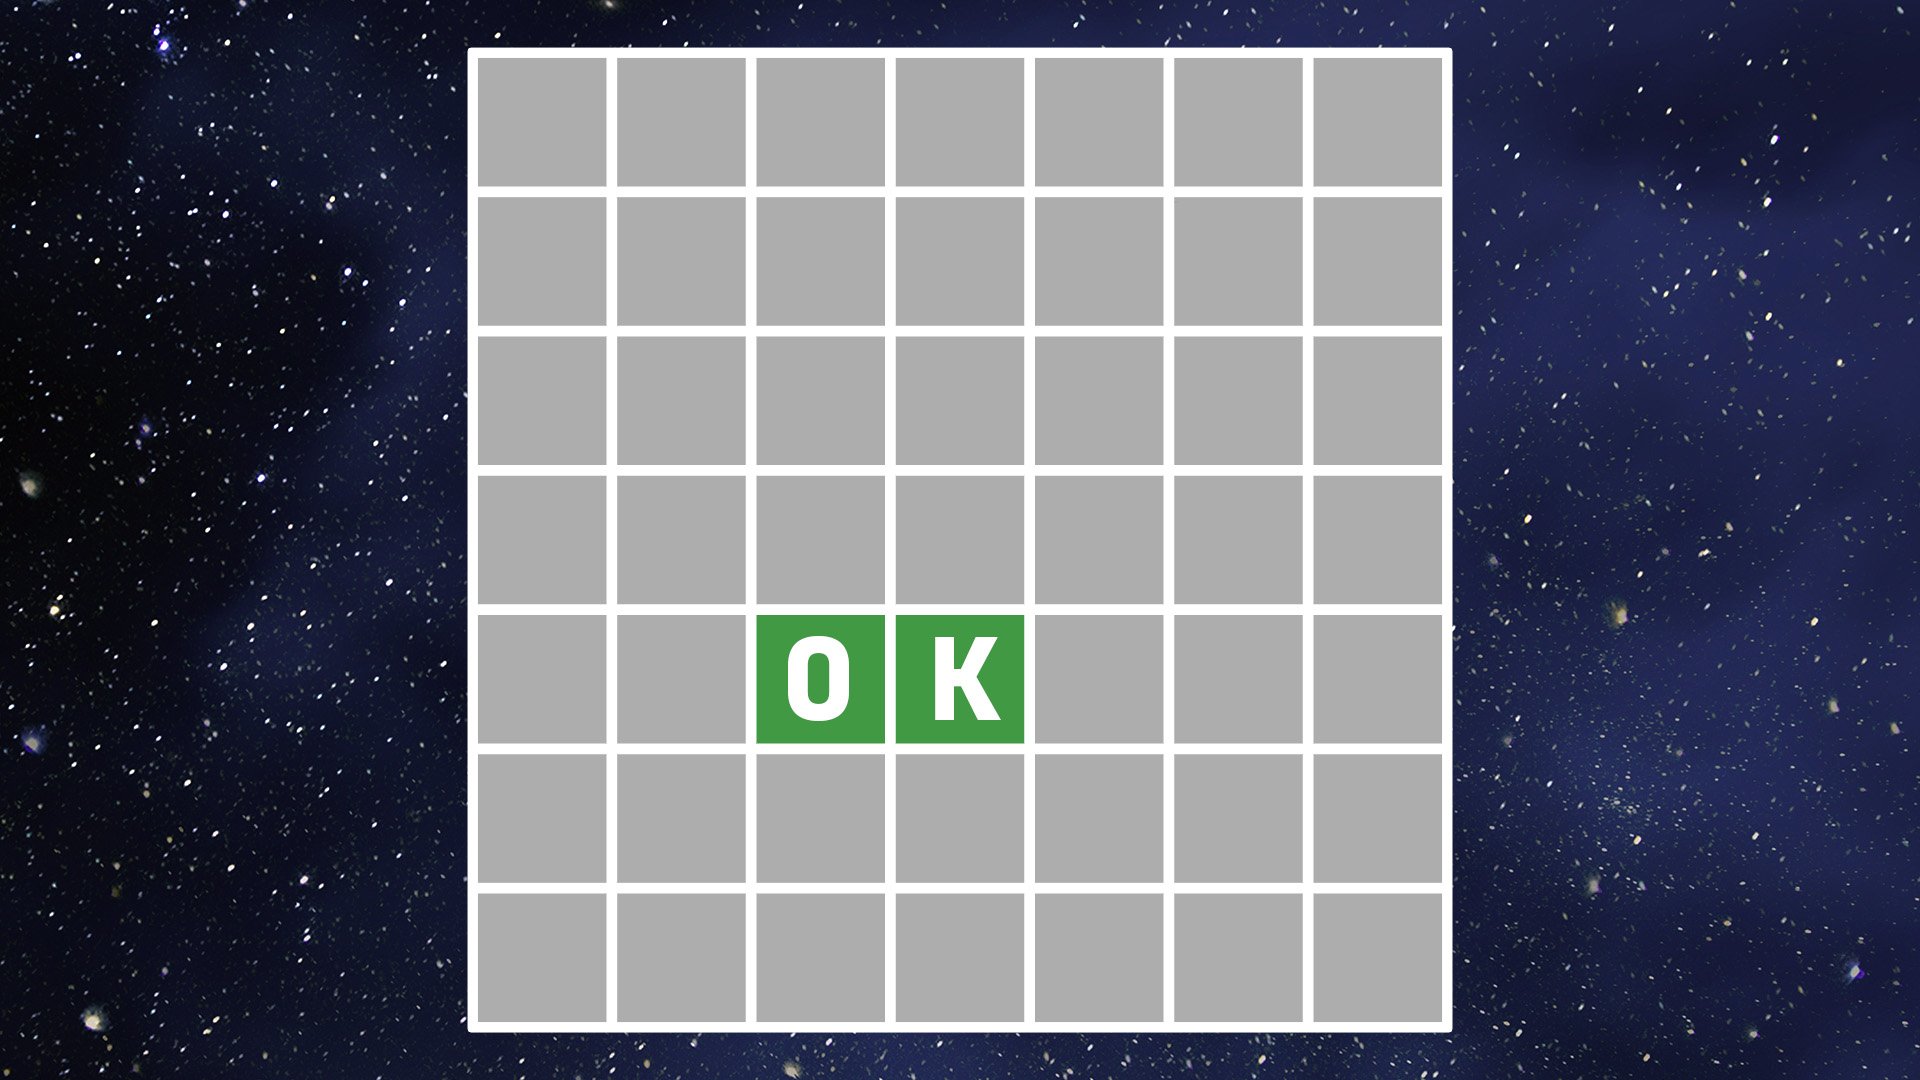 Wordle grid with the word OK to start you off